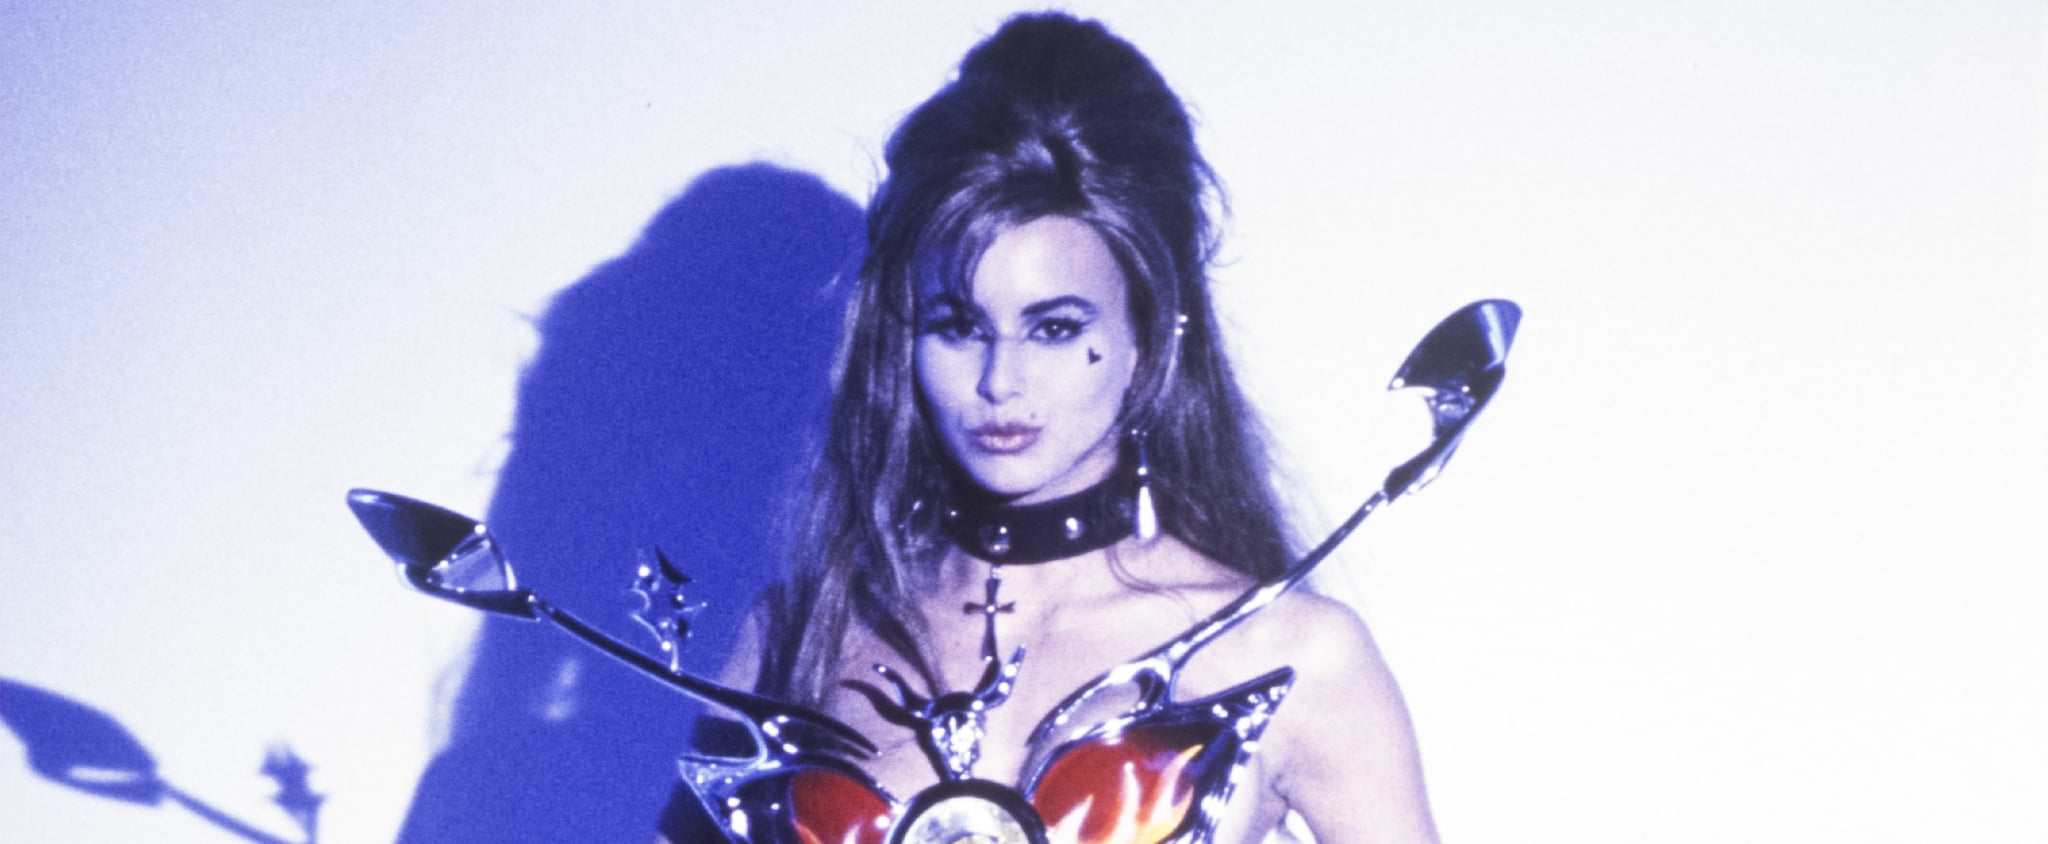 Thierry Mugler's Most Over-the-Top Fashion Designs